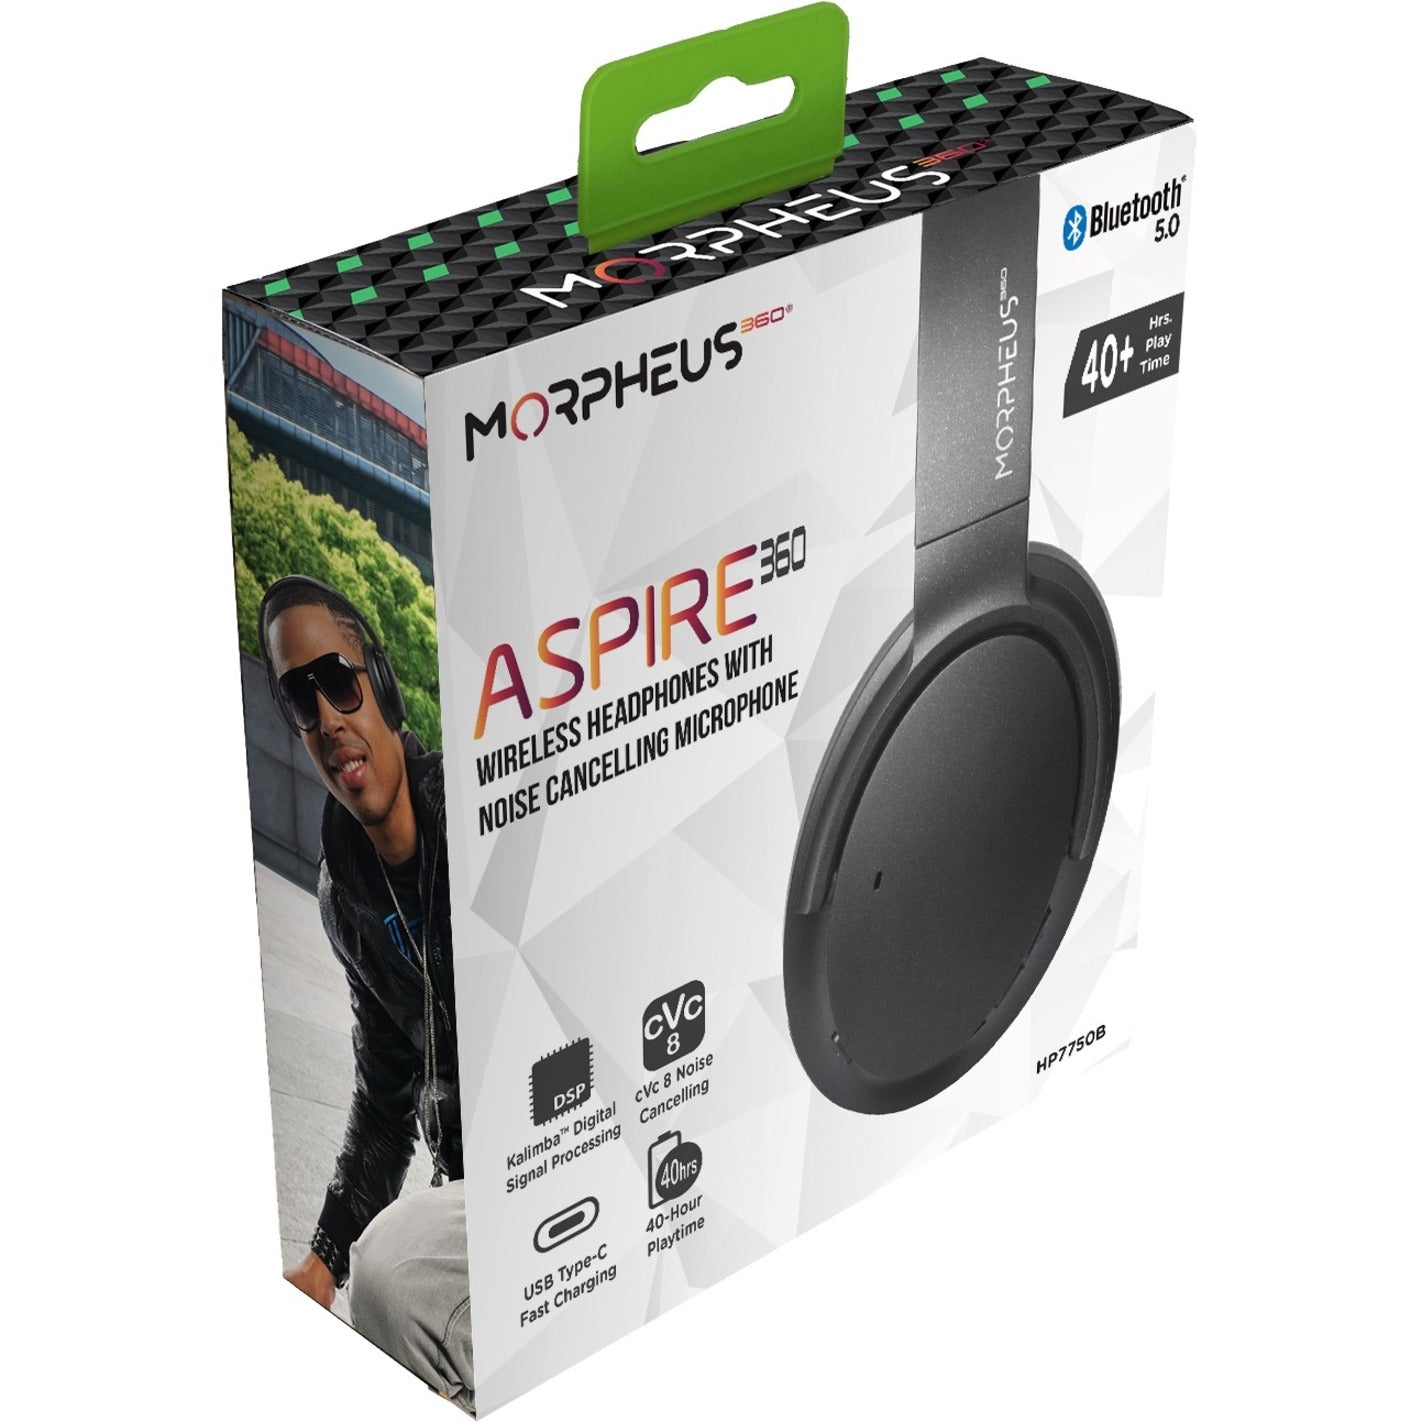 Morpheus 360 HP7750B ASPIRE 360 Wireless Headphones with Noise Cancelling Microphone, Robust DSP, Bluetooth 5, Black